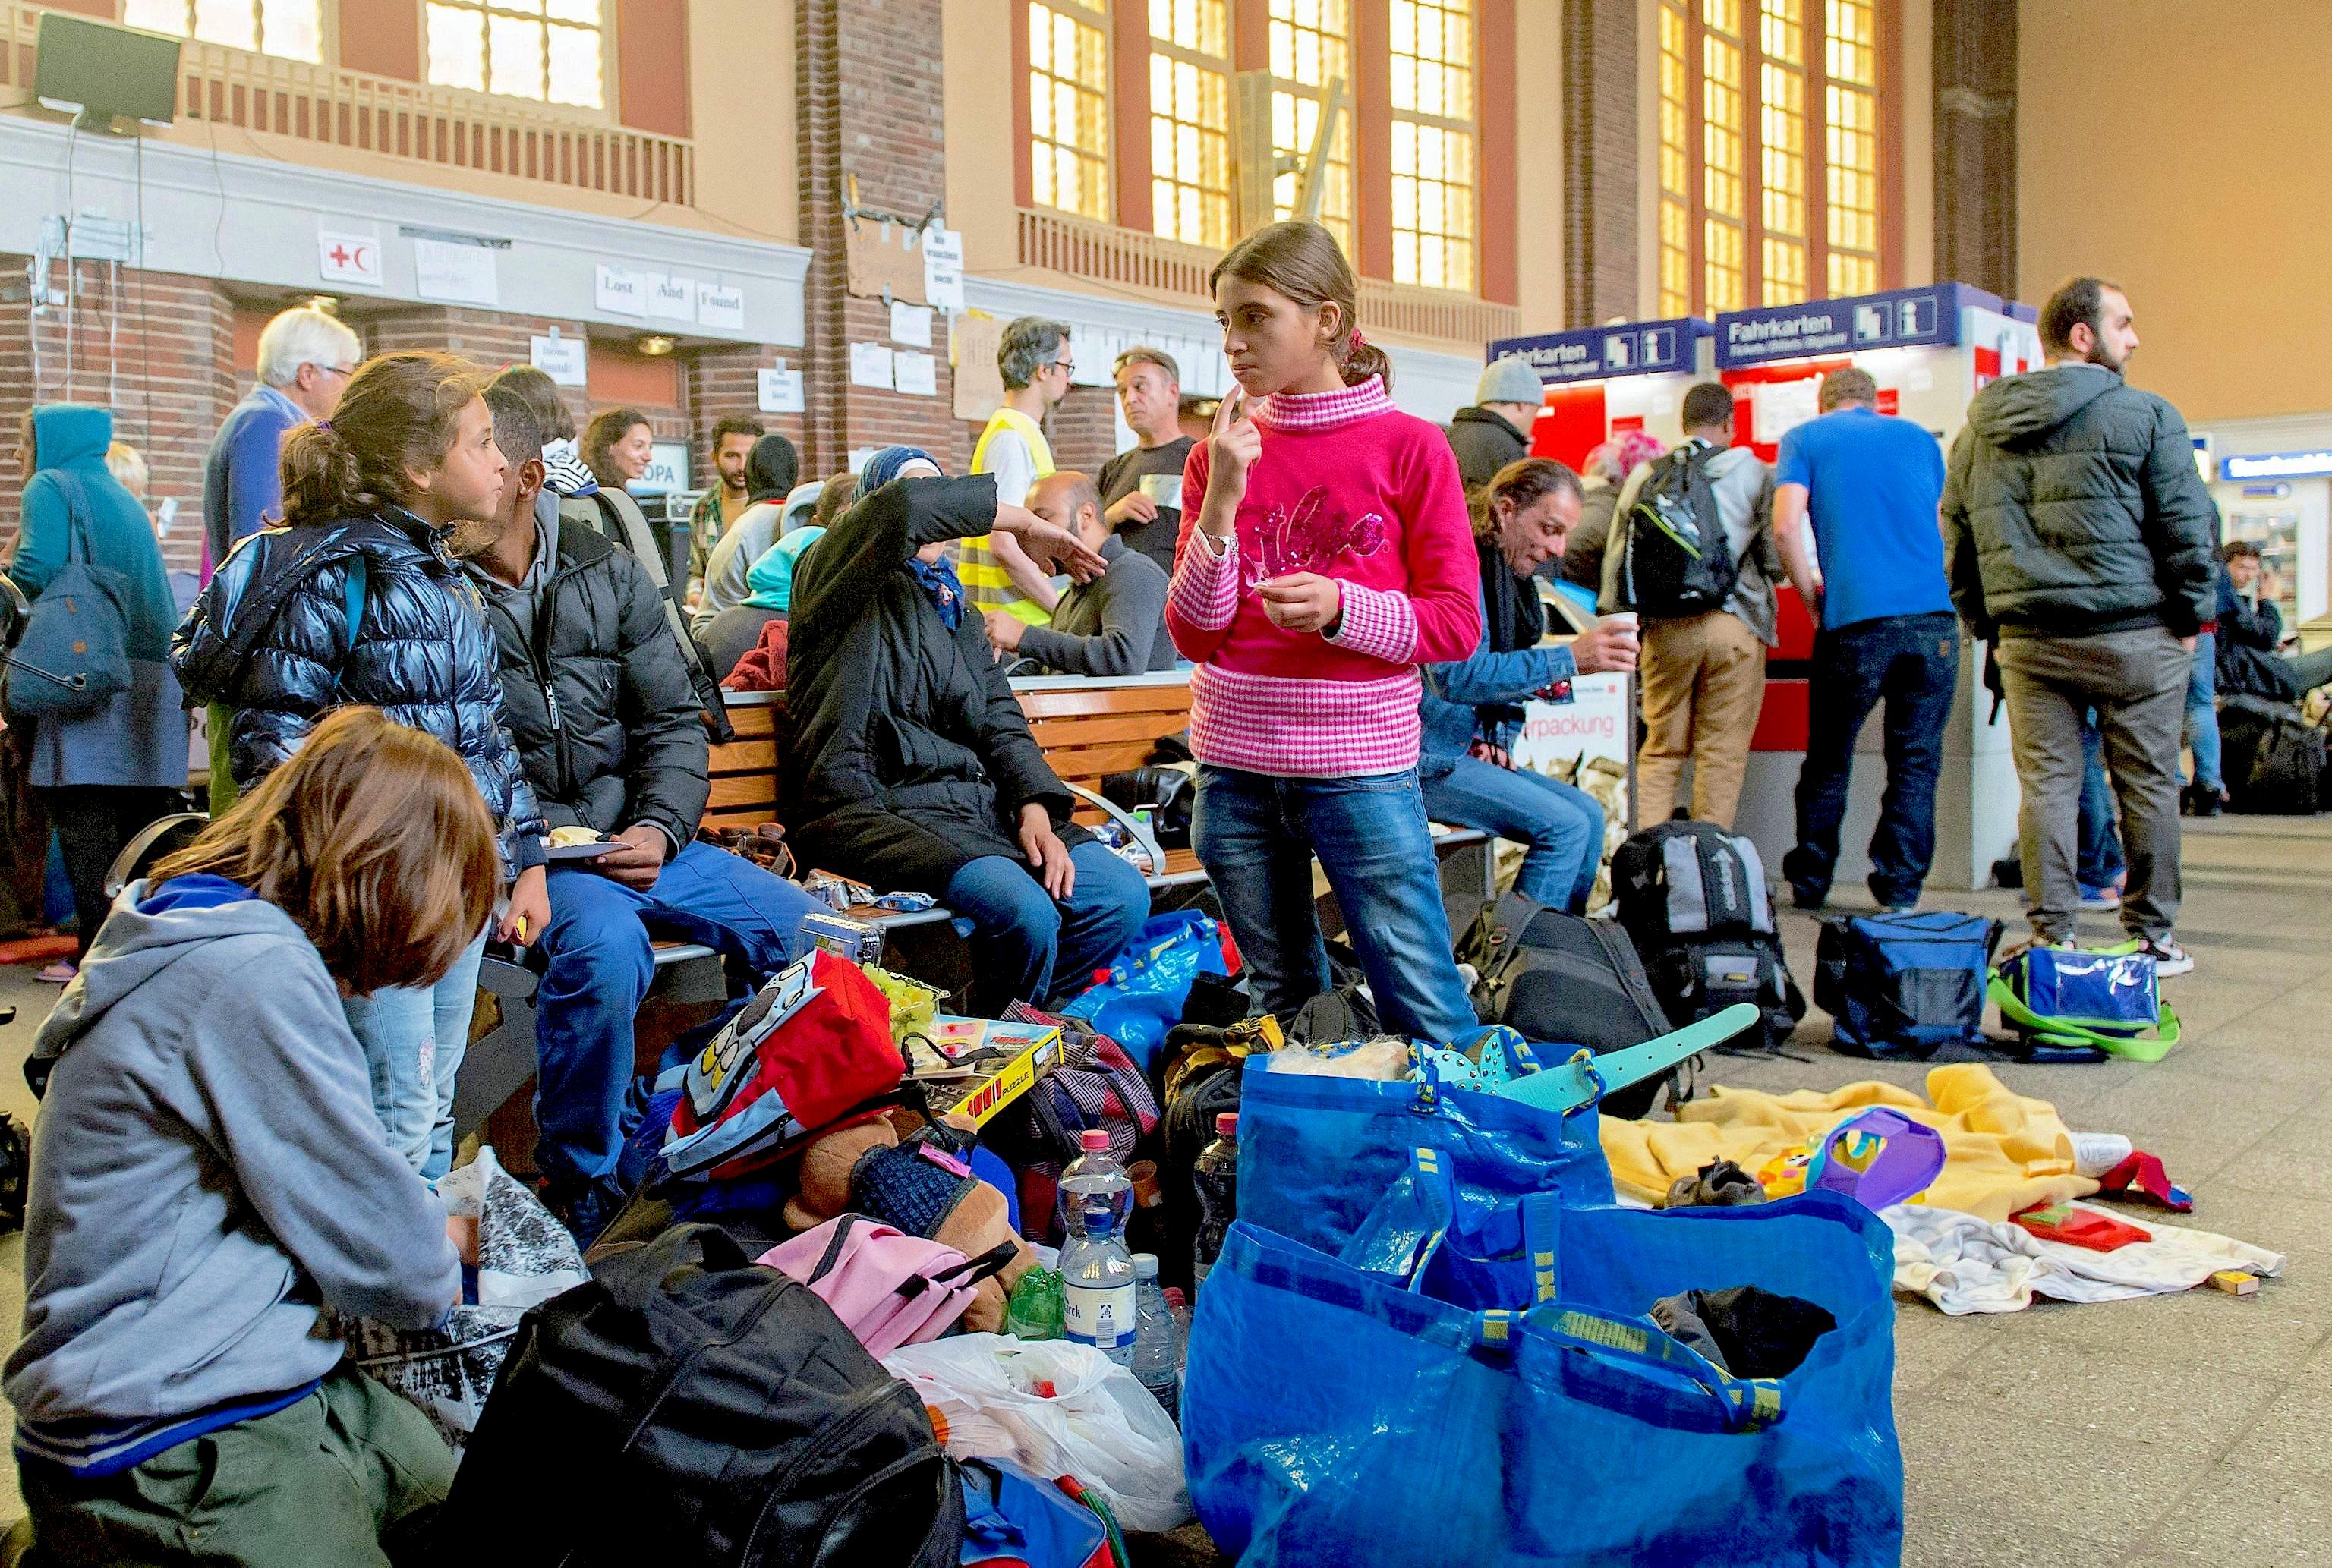 Refugees at the railway station in Flensburg